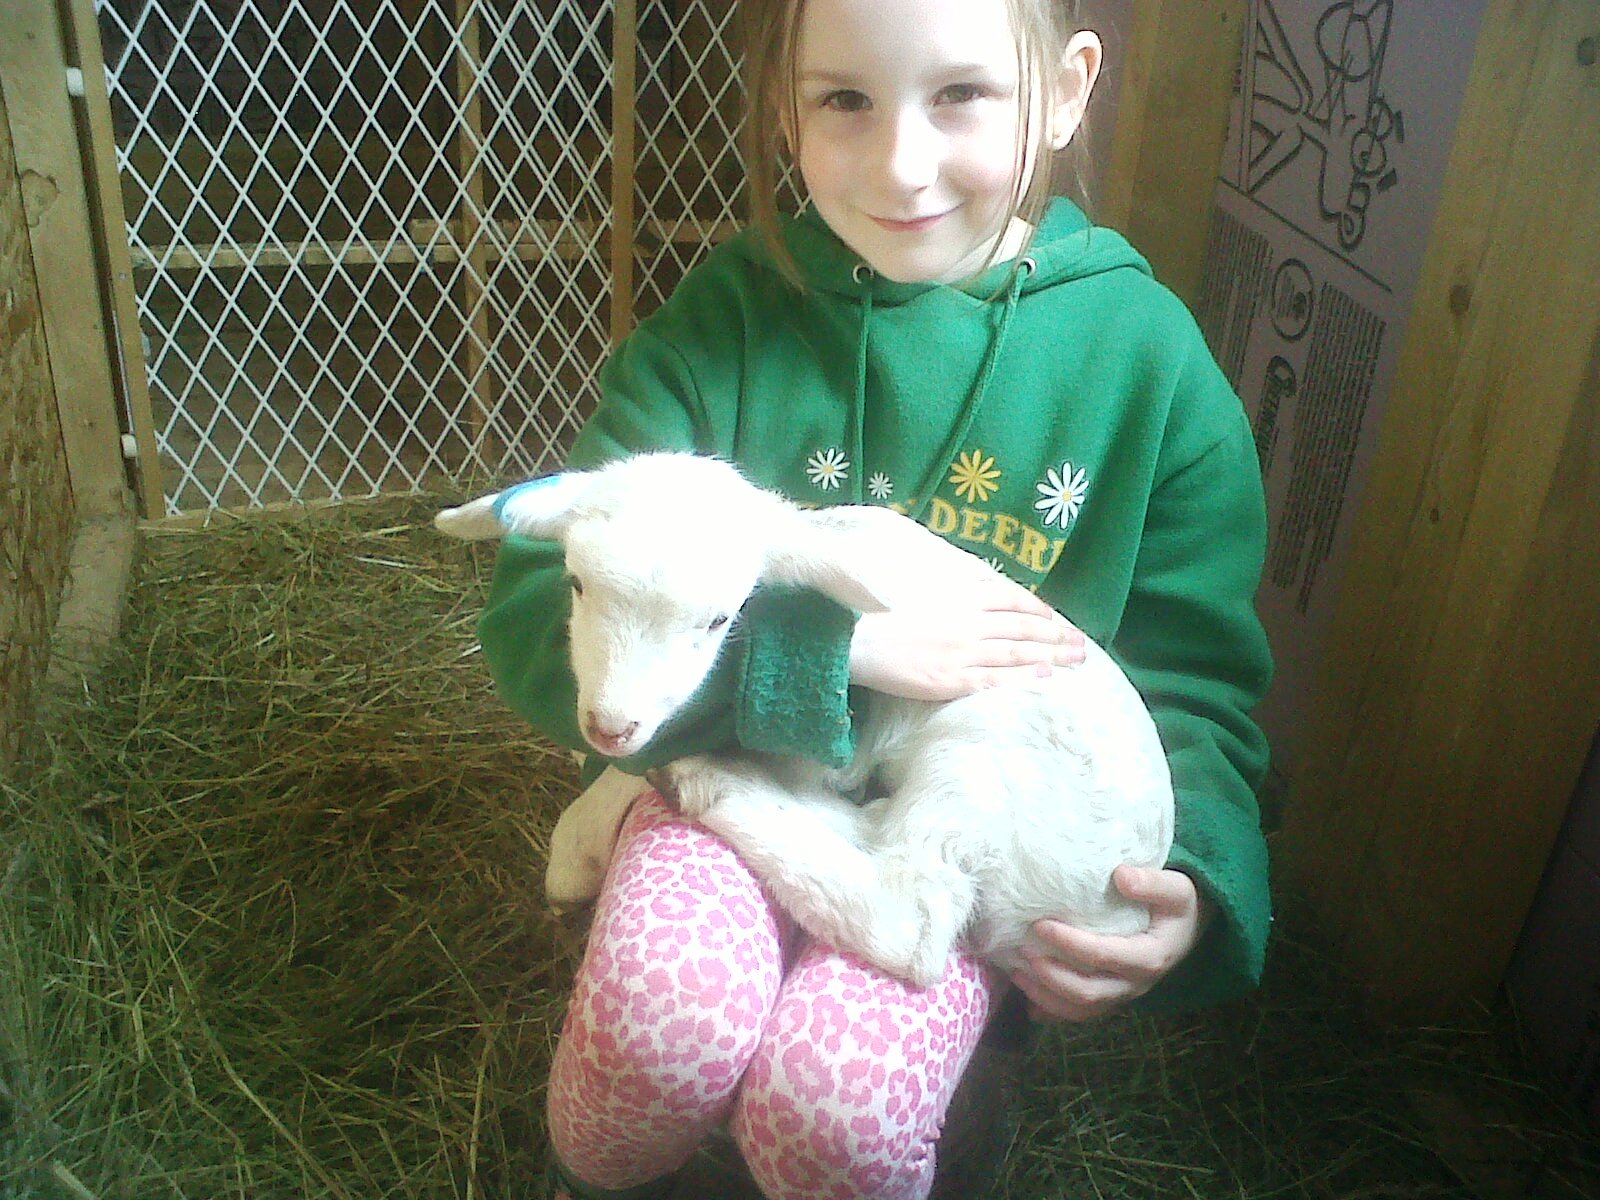 Russell, another orphaned lamb